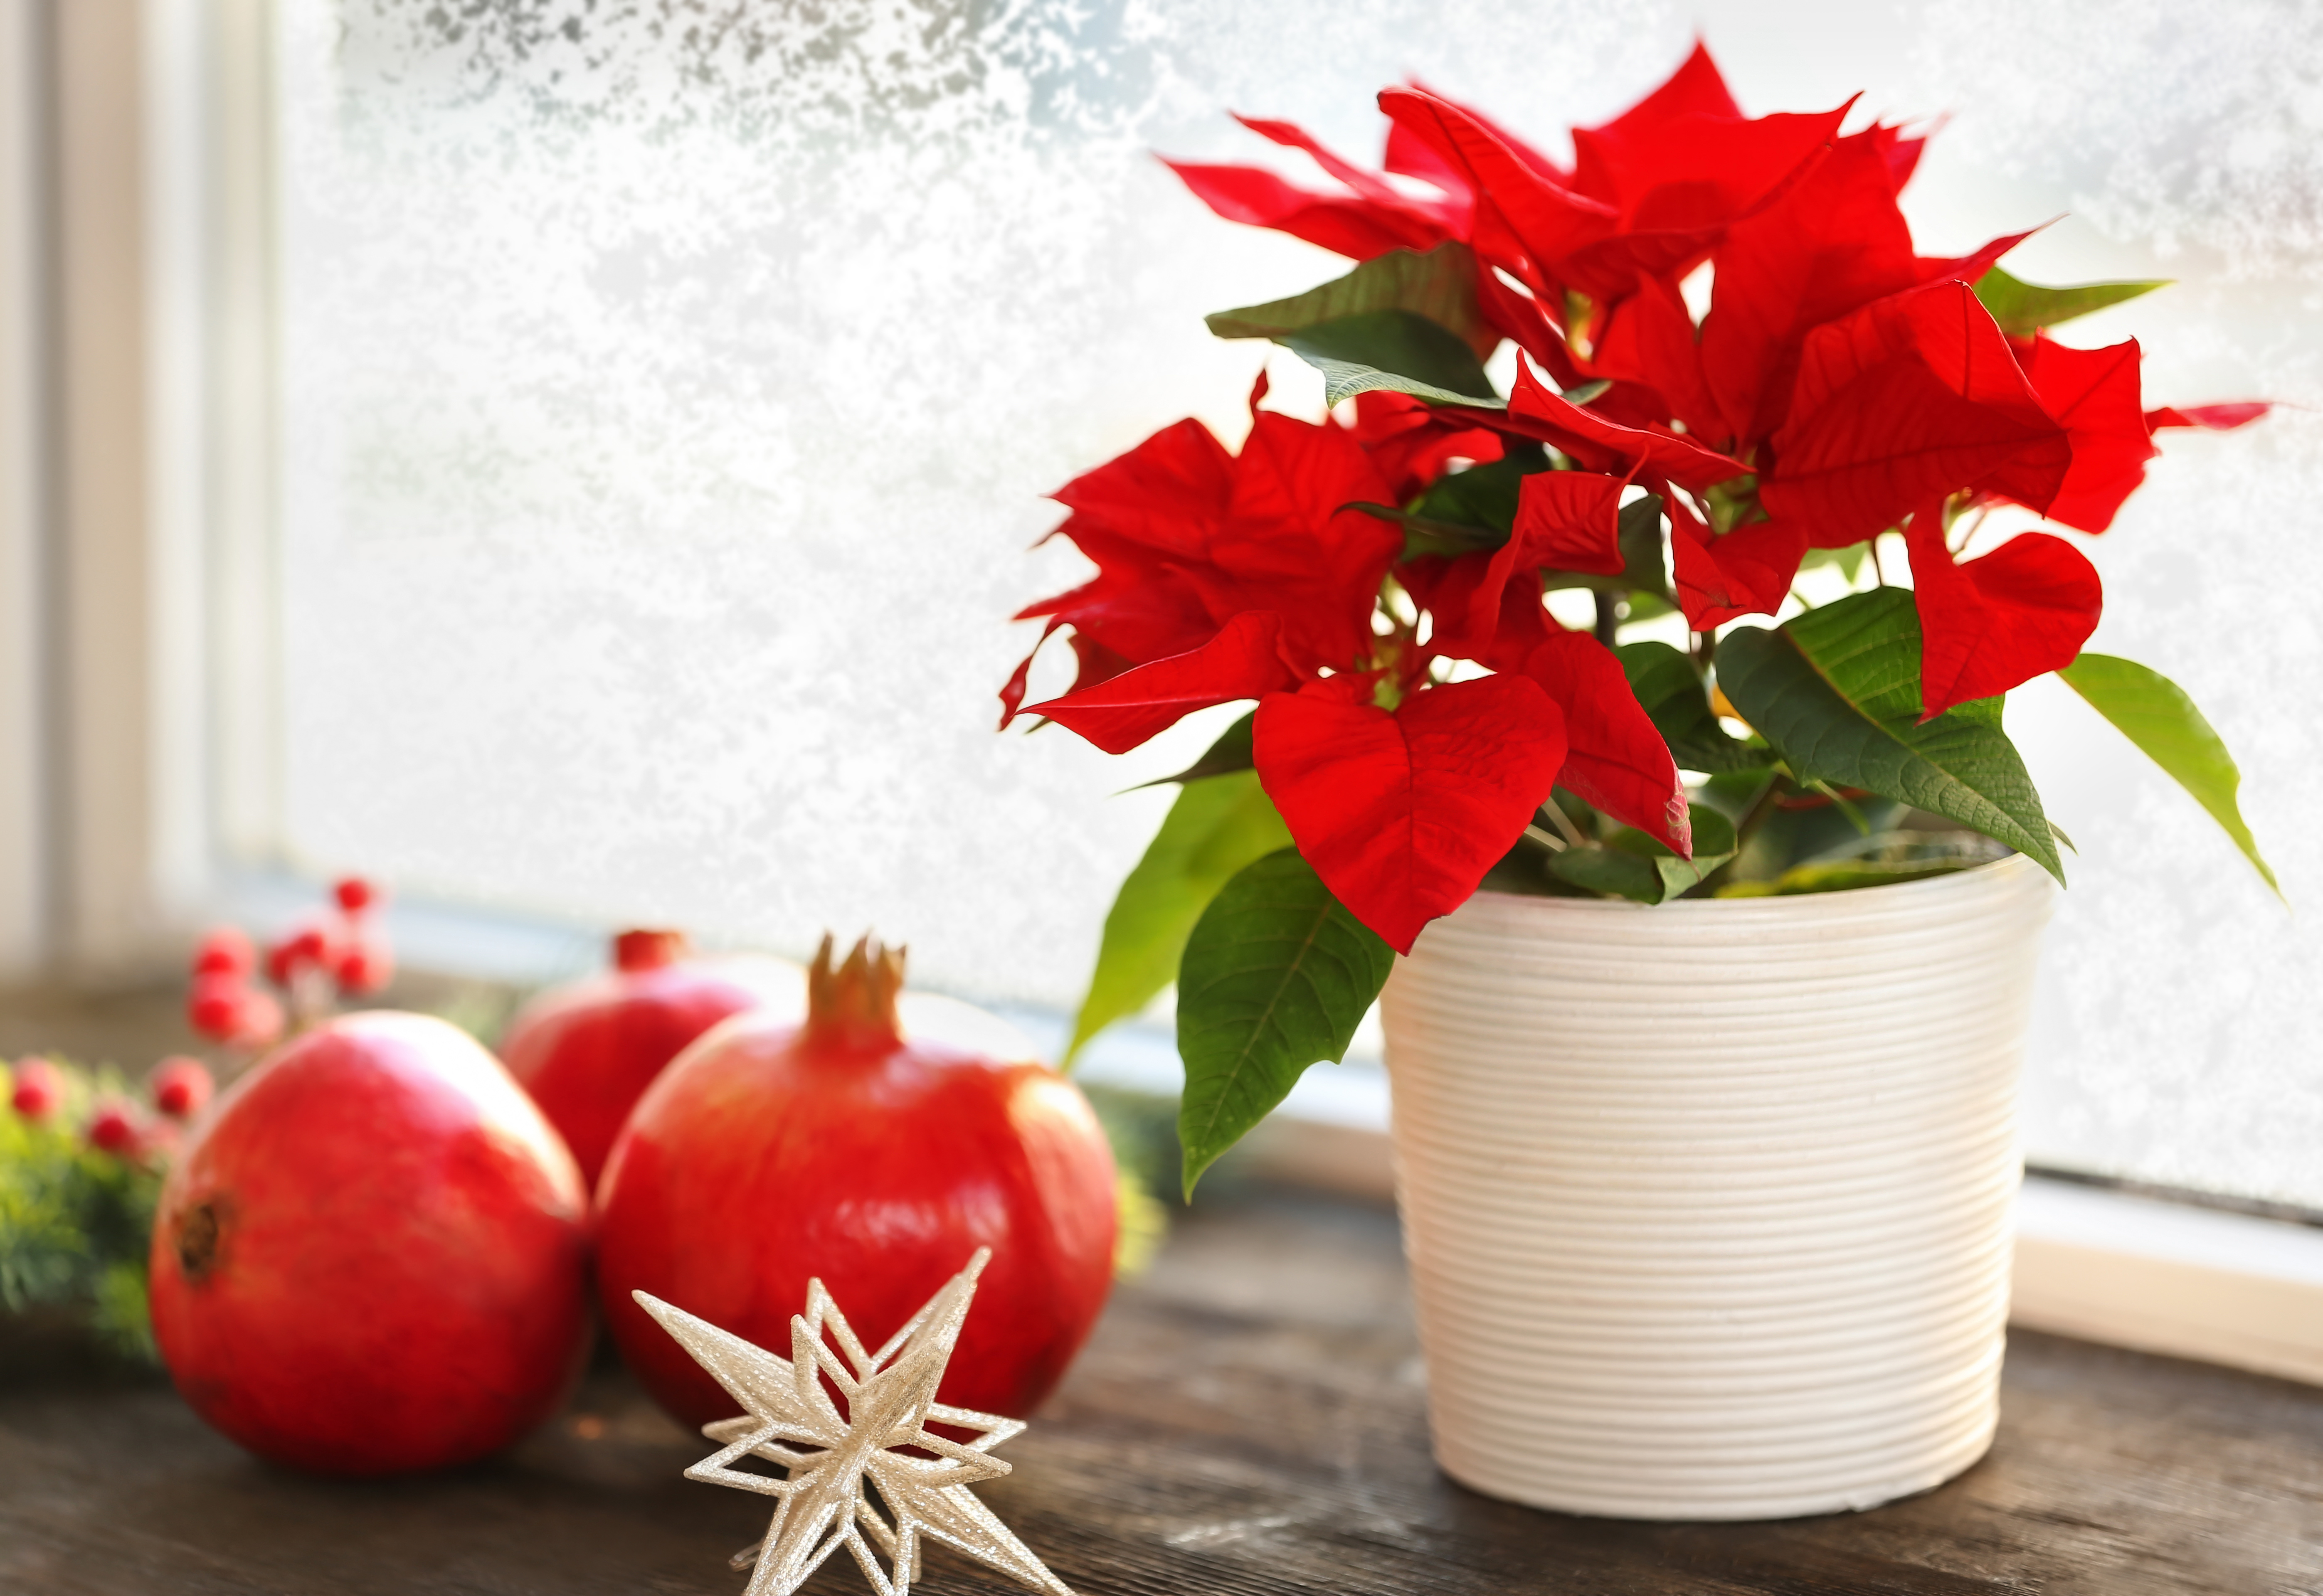 Poinsettia is poisonous to dogs